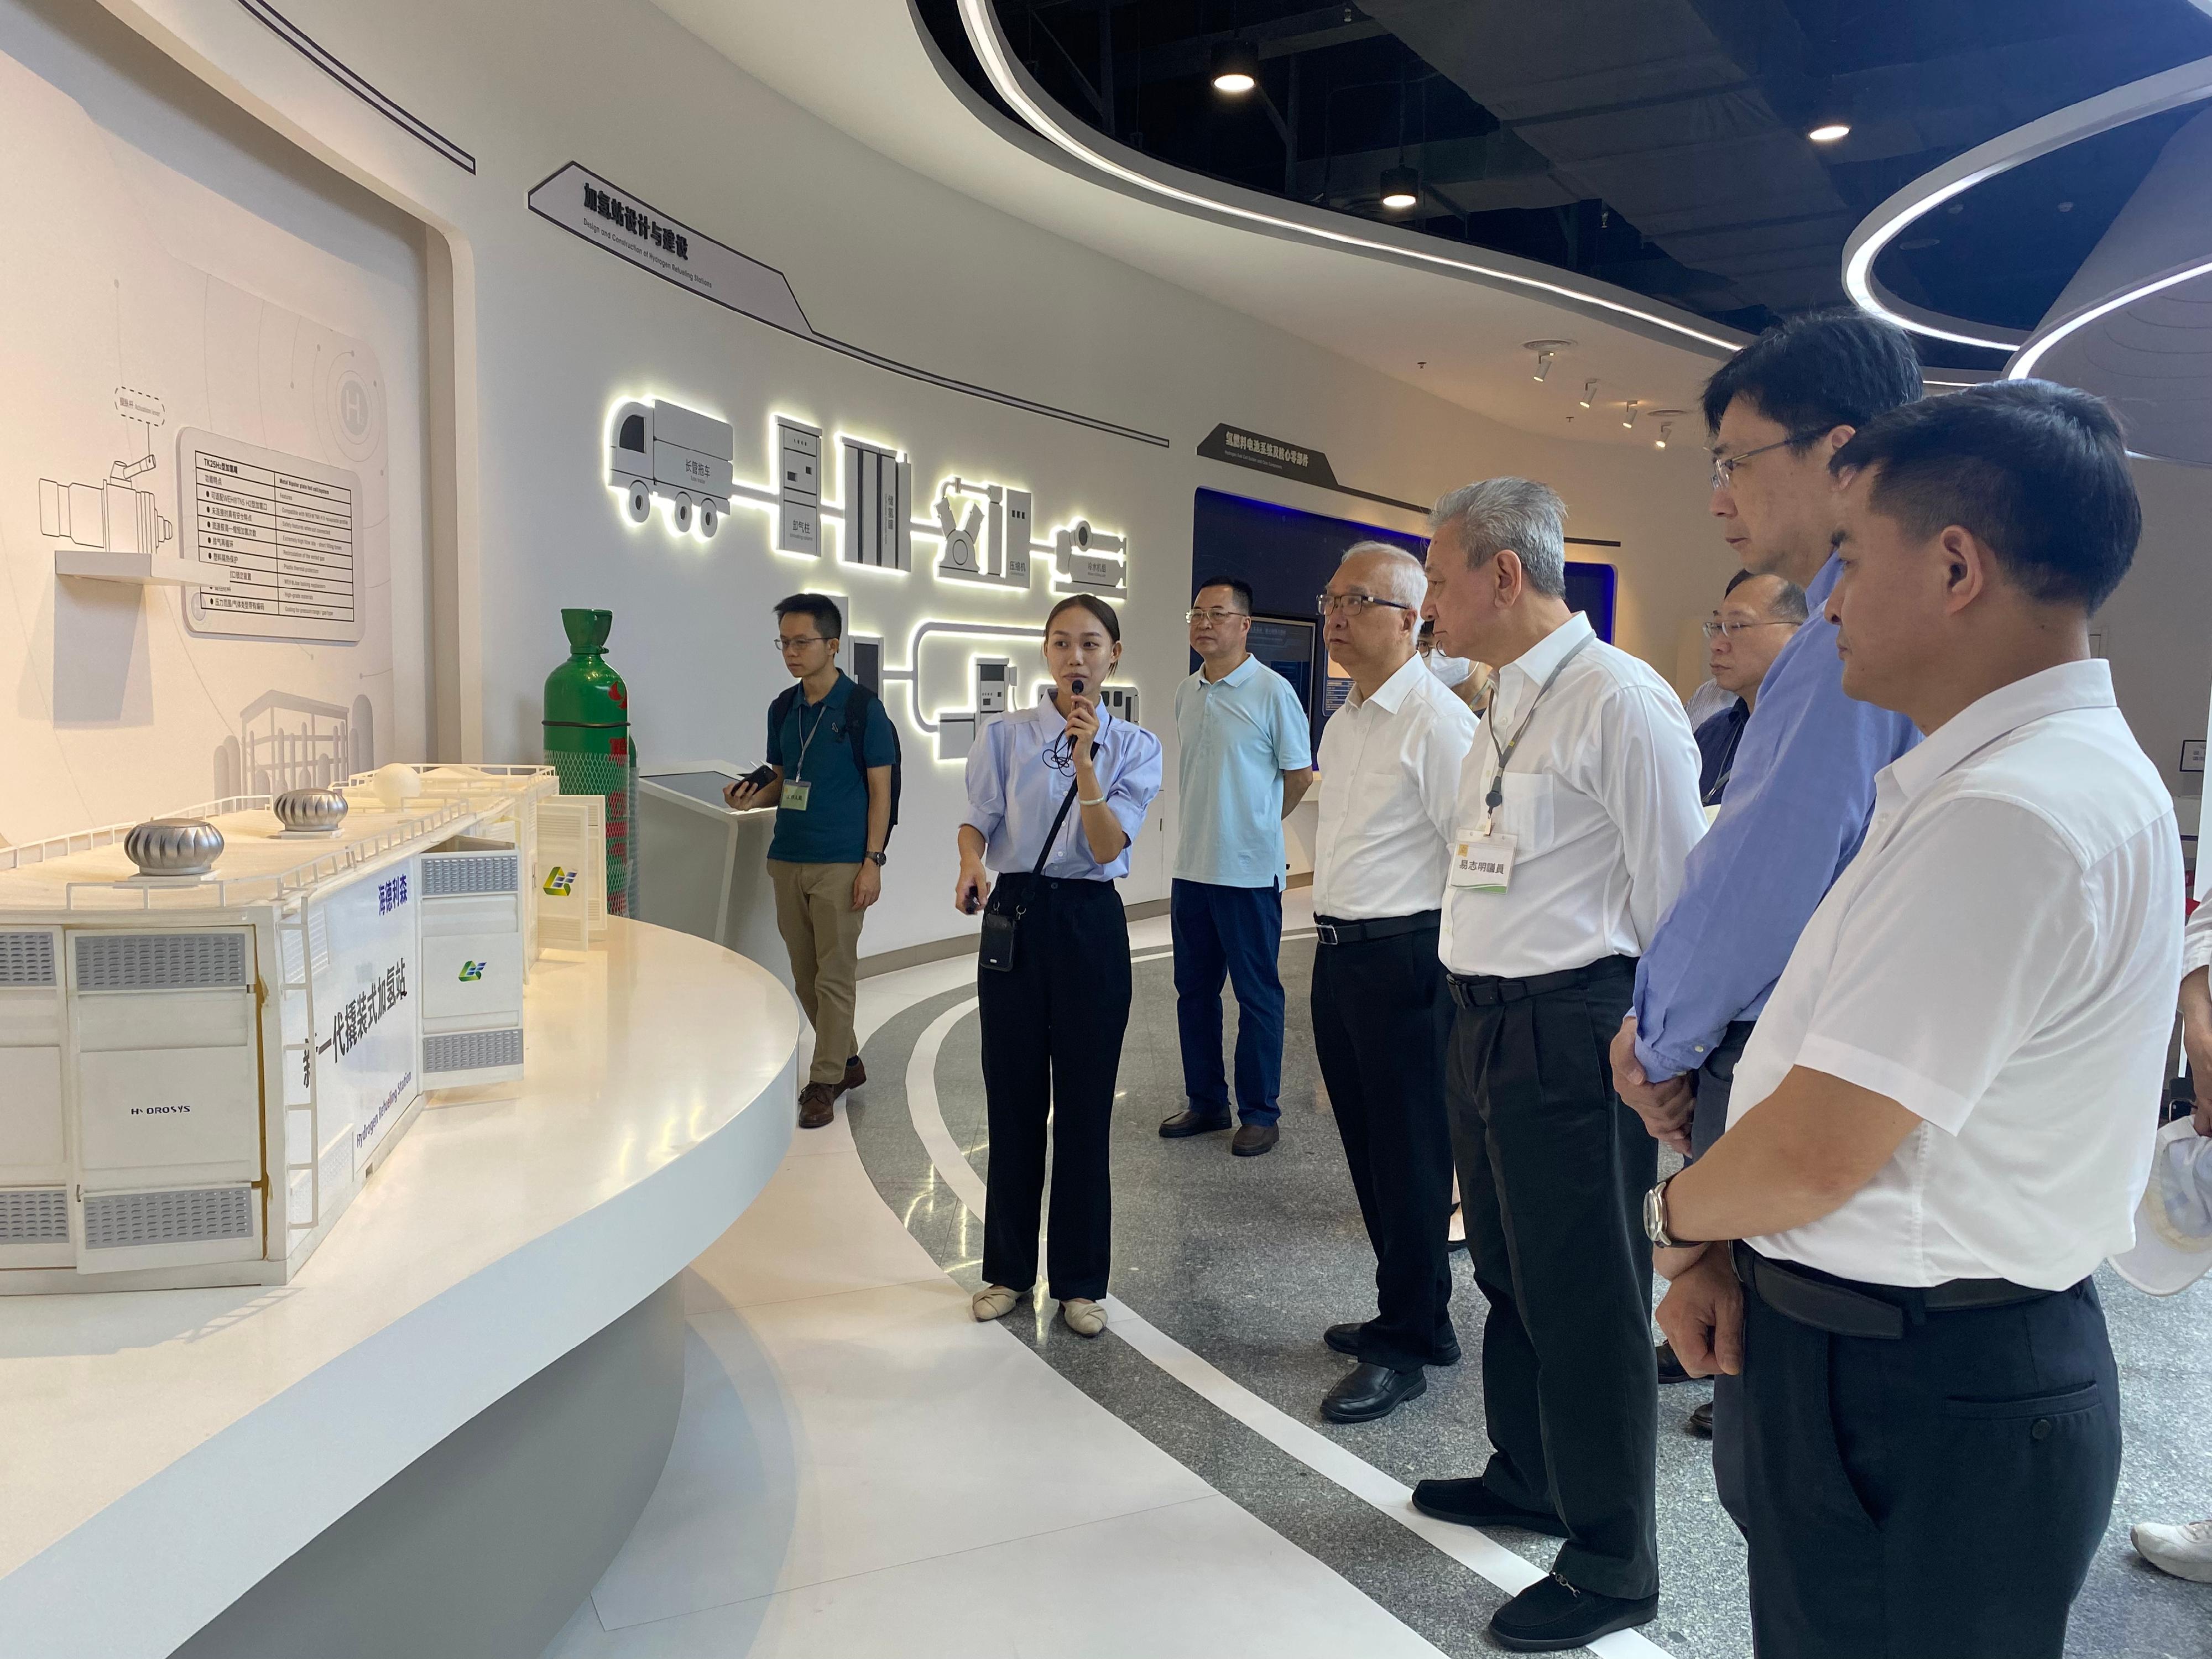 The Secretary for Environment and Ecology, Mr Tse Chin-wan, together with the Legislative Council Panel on Environmental Affairs, today (August 8) visited the Nanhai Hydrogen Center in Foshan in the morning. Photo shows Mr Tse (fourth left) and the delegation of the Legislative Council Panel on Environmental Affairs receiving a briefing from a representative on the planning and achievements of hydrogen energy development in Foshan to learn more about the development and application of hydrogen energy in the Mainland.